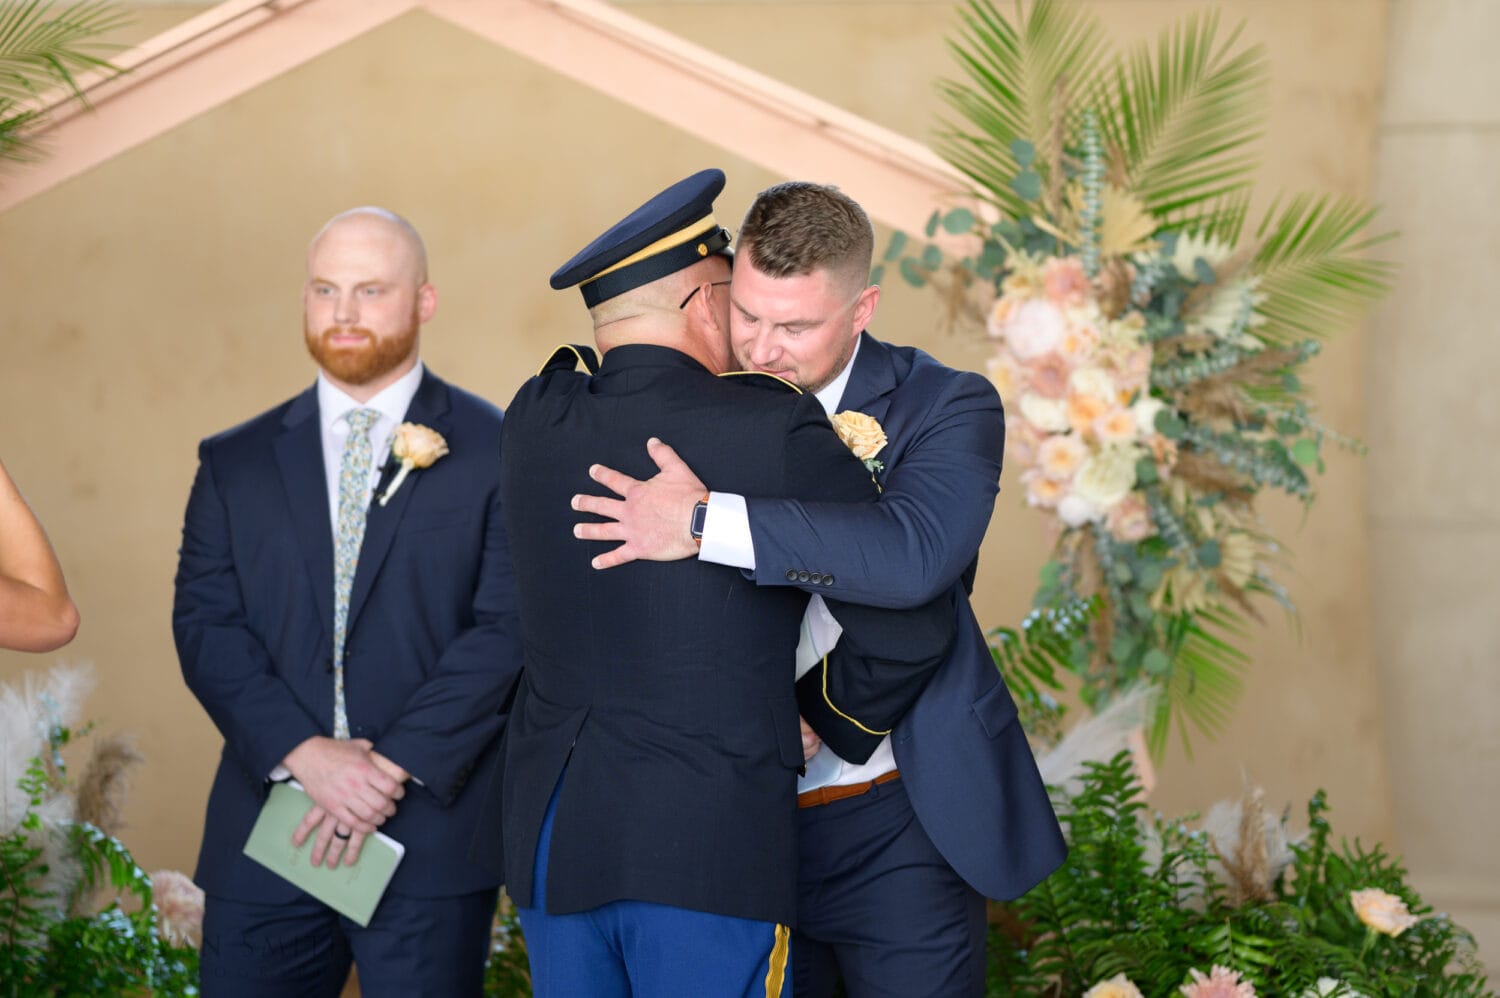 Groom hugging bride's father - 21 Main Events